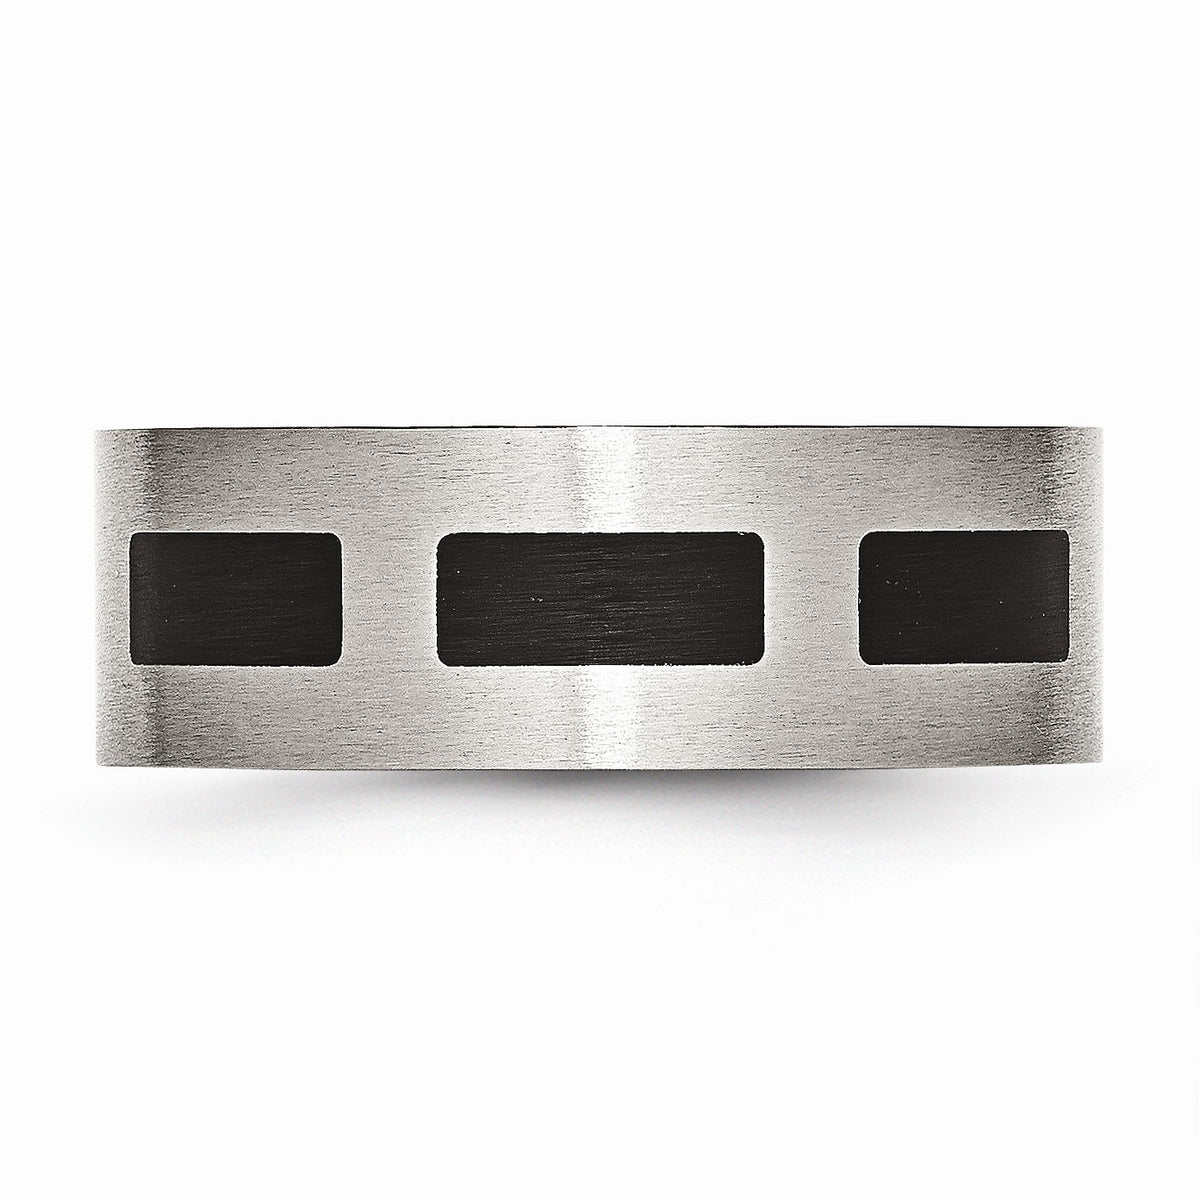 Alternate view of the Stainless Steel &amp; Black Rubber, 8mm Satin Standard Fit Band by The Black Bow Jewelry Co.